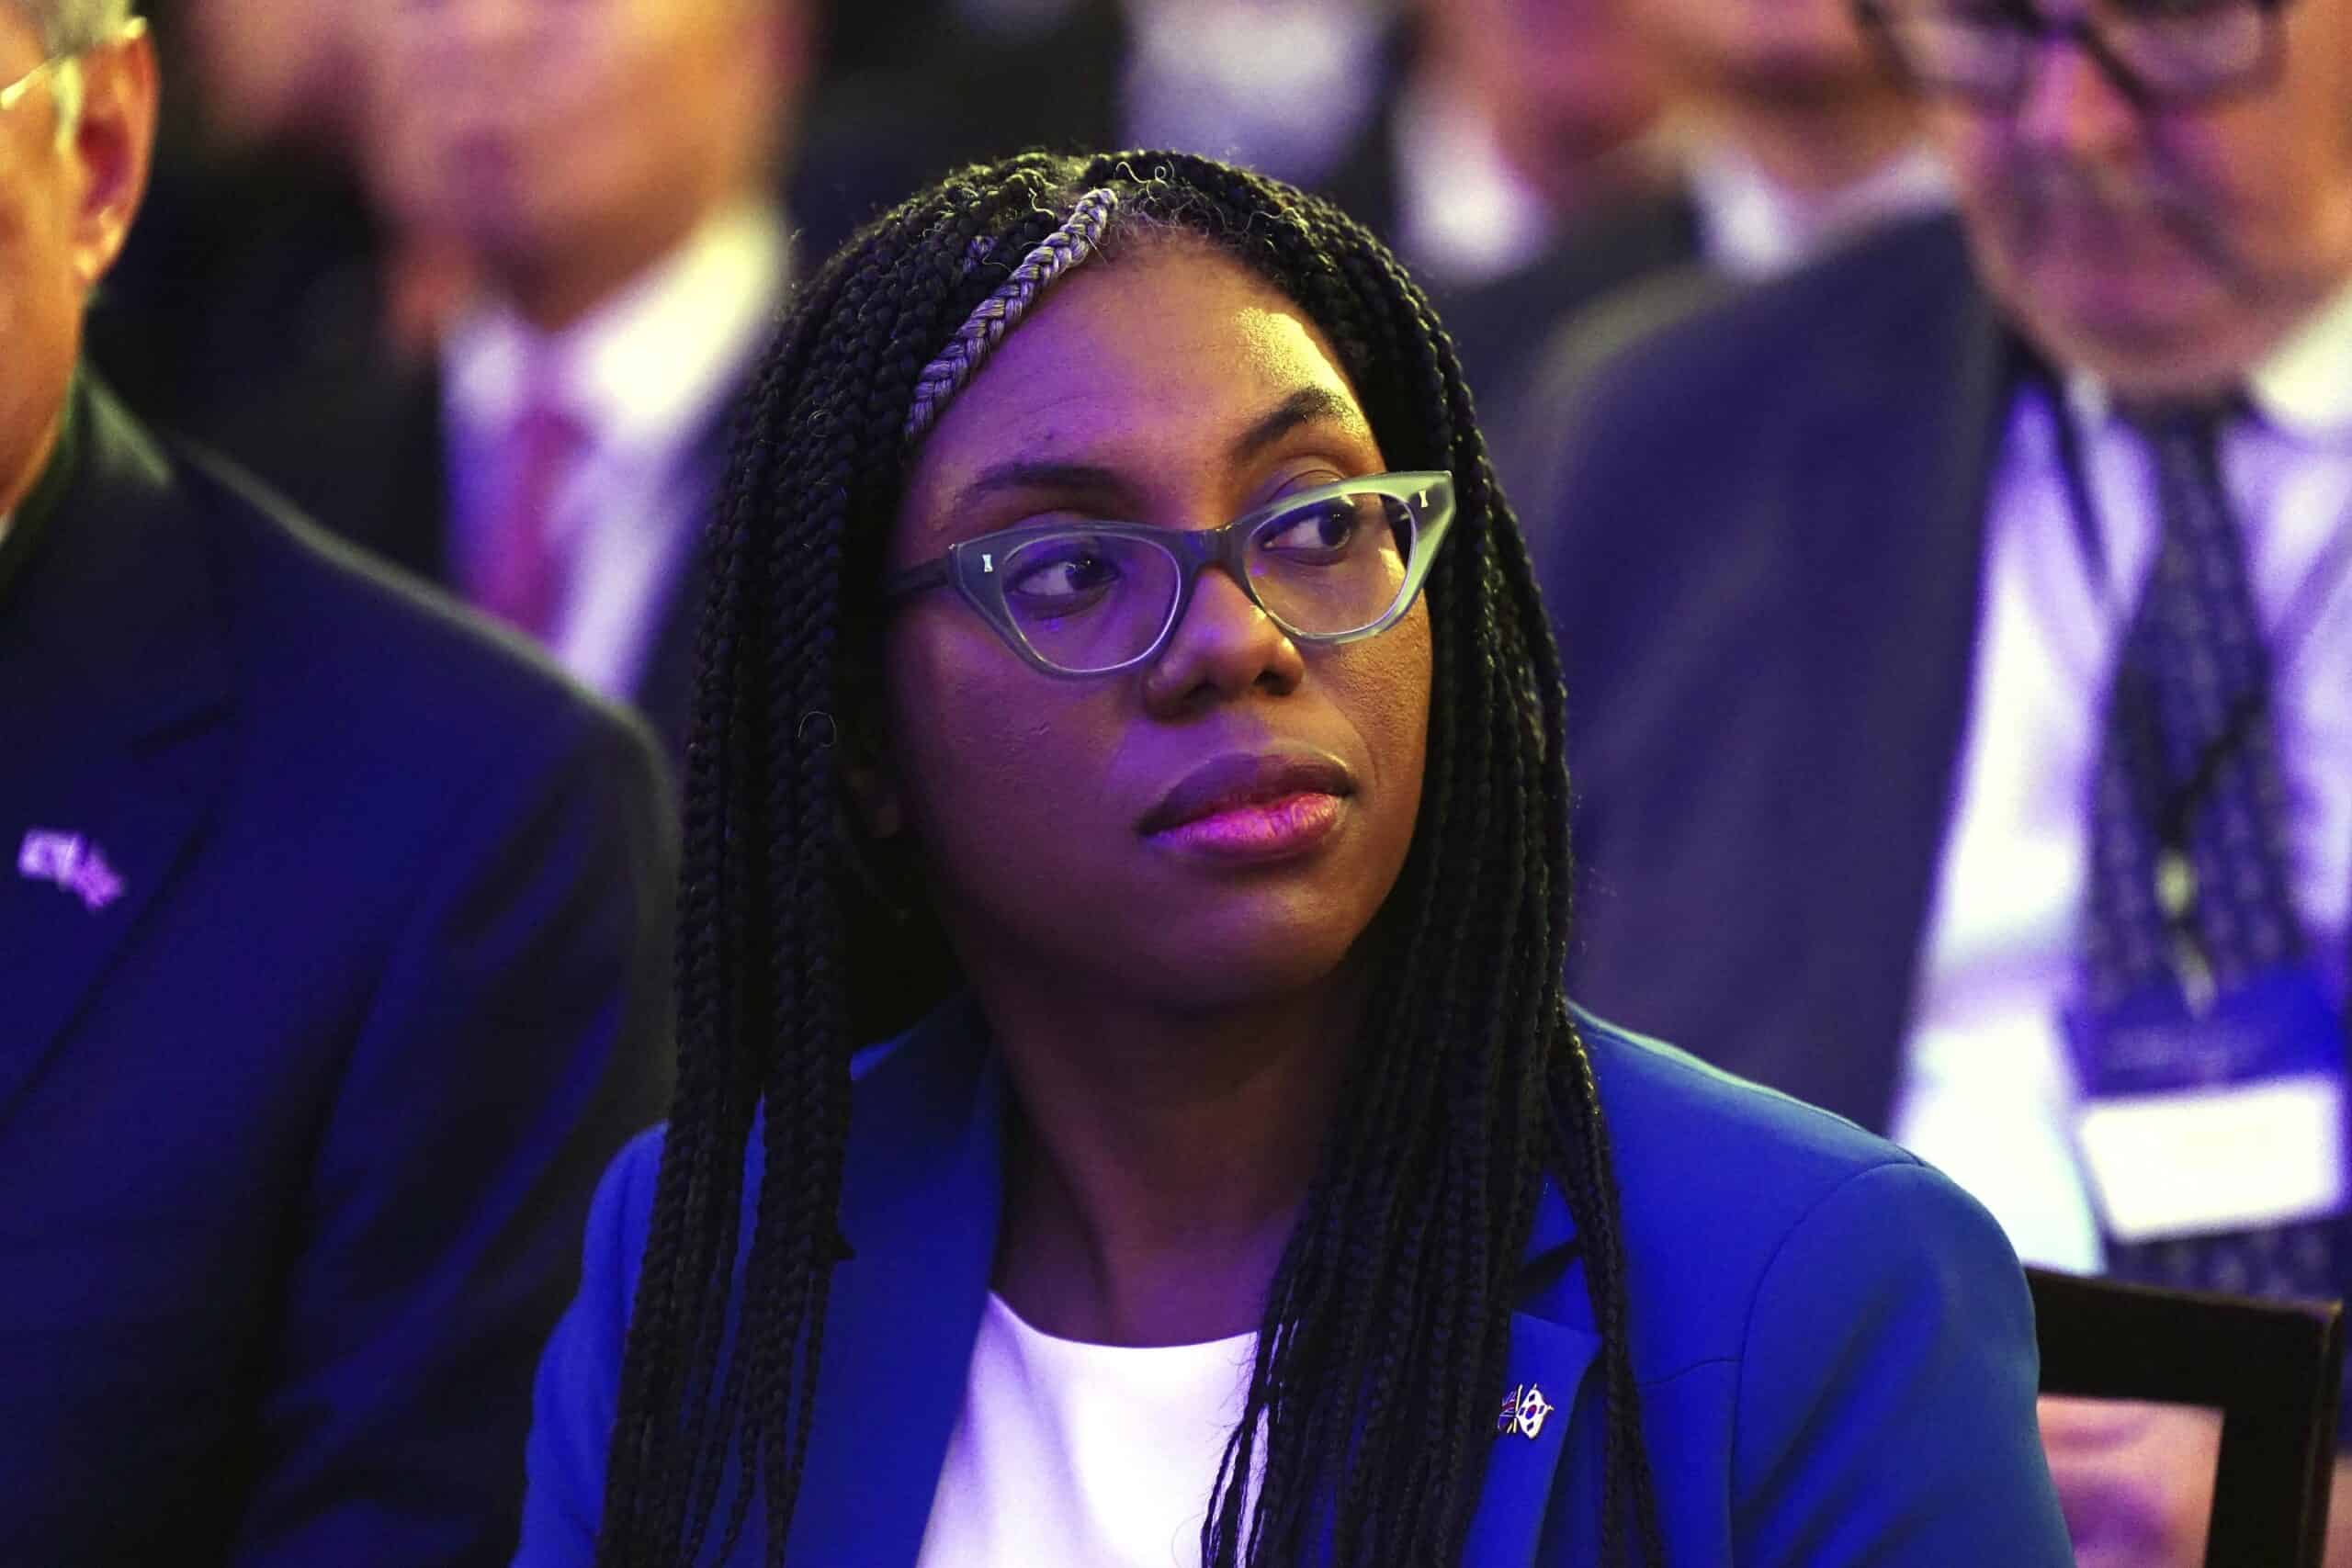 Kemi Badenoch slams council for mistake that could thwart leadership hopes